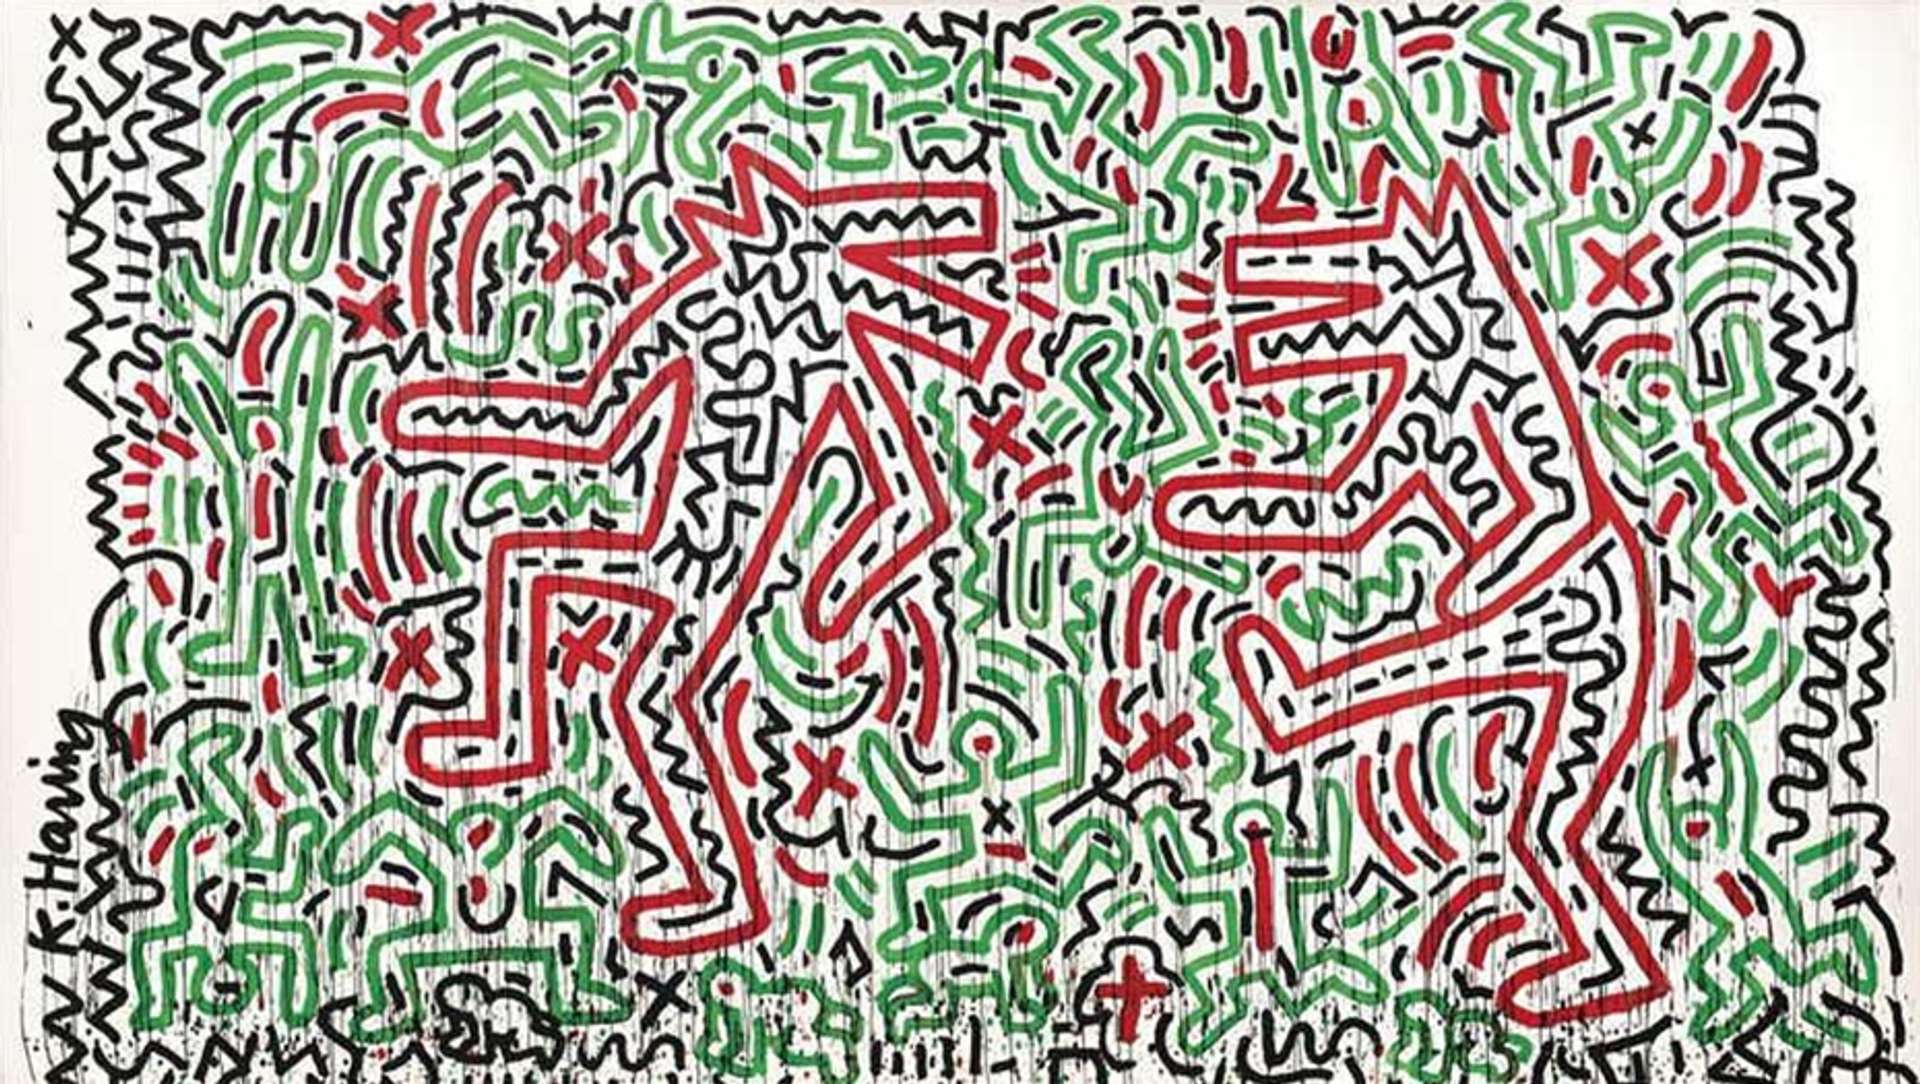 Untitled (Dancing Dogs) by Keith Haring